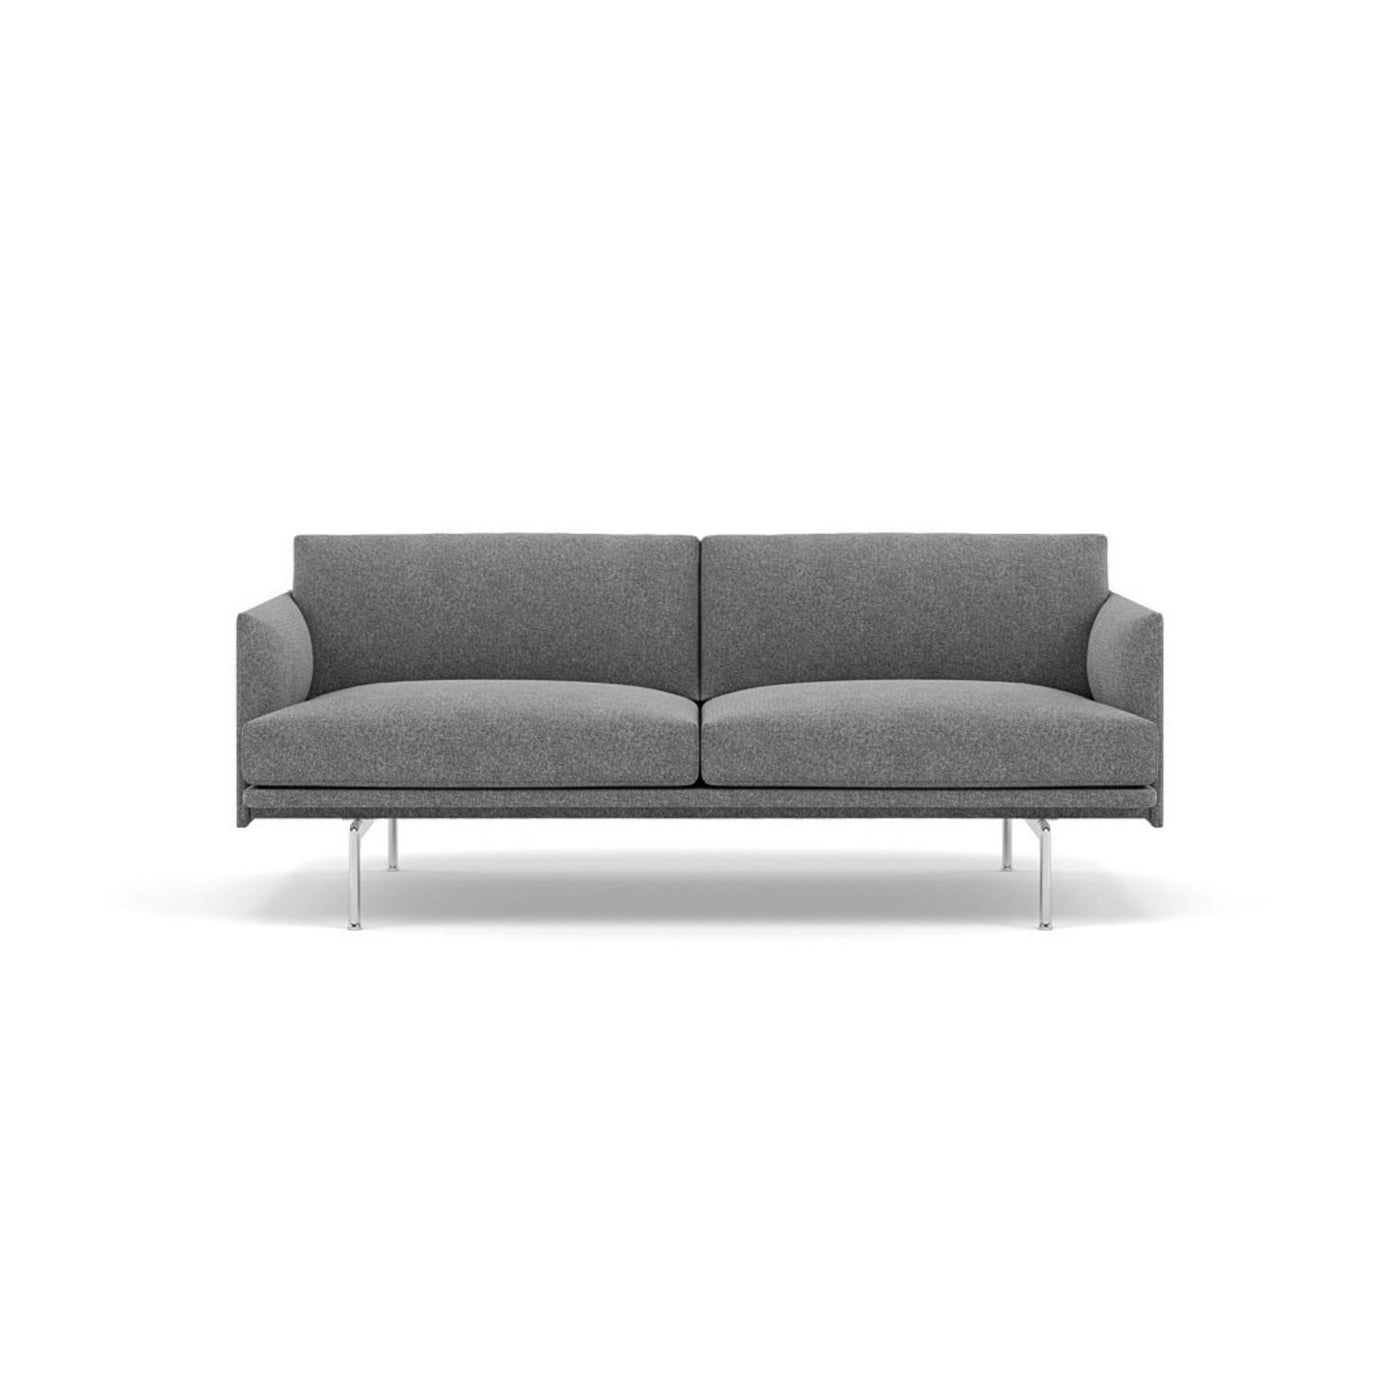 muuto outline 2 seater sofa in hallingdal 166 fabric and polished aluminium legs. made to order from someday designs. #colour_hallingdal-166